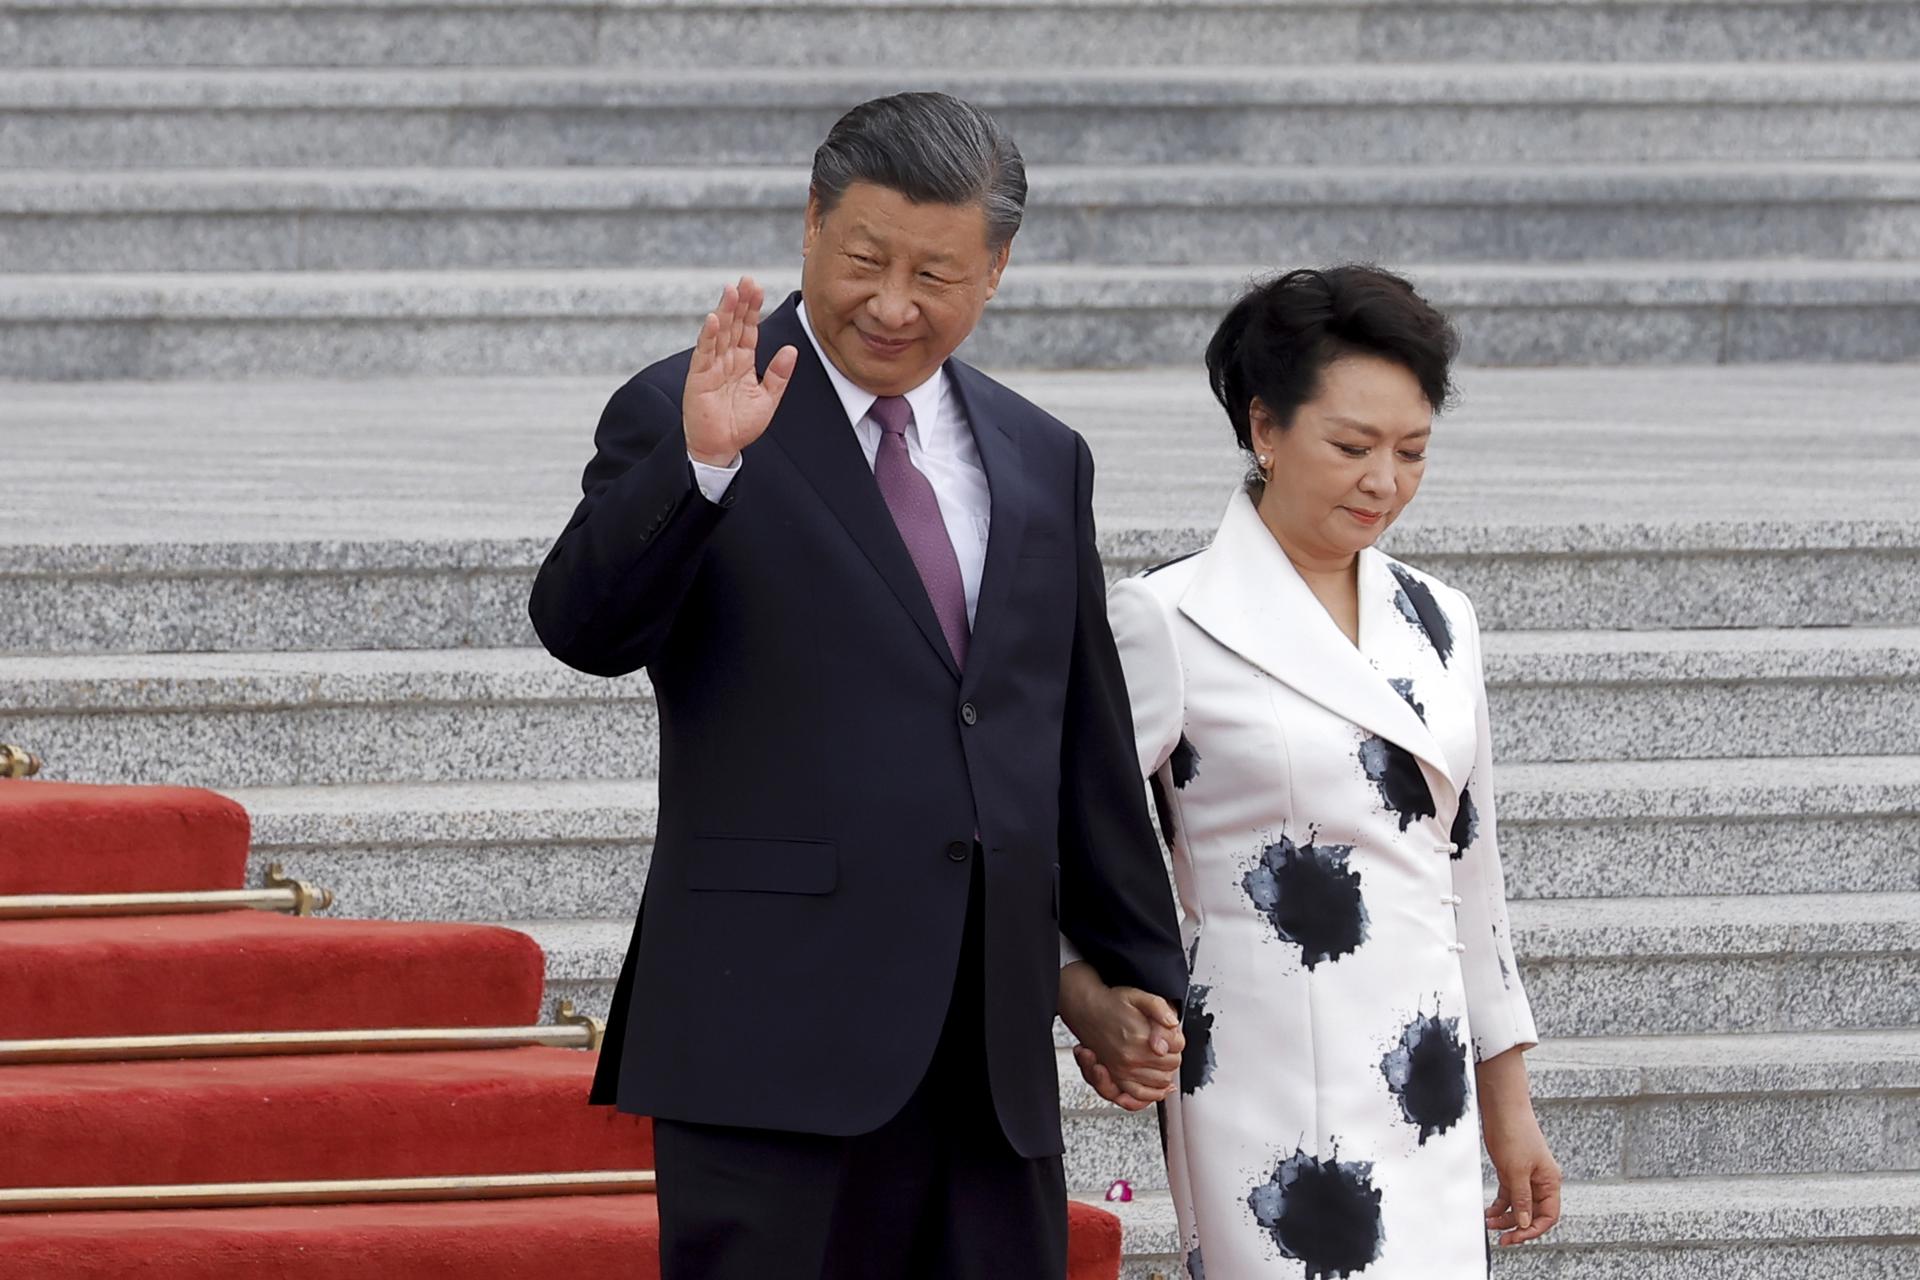 China's President Xi Jinping (L) and his wife Peng Liyuan attend a ceremony at the Great Hall of the People in Beijing, China, 26 May 2023. EFE-EPA FILE/THOMAS PETER / POOL